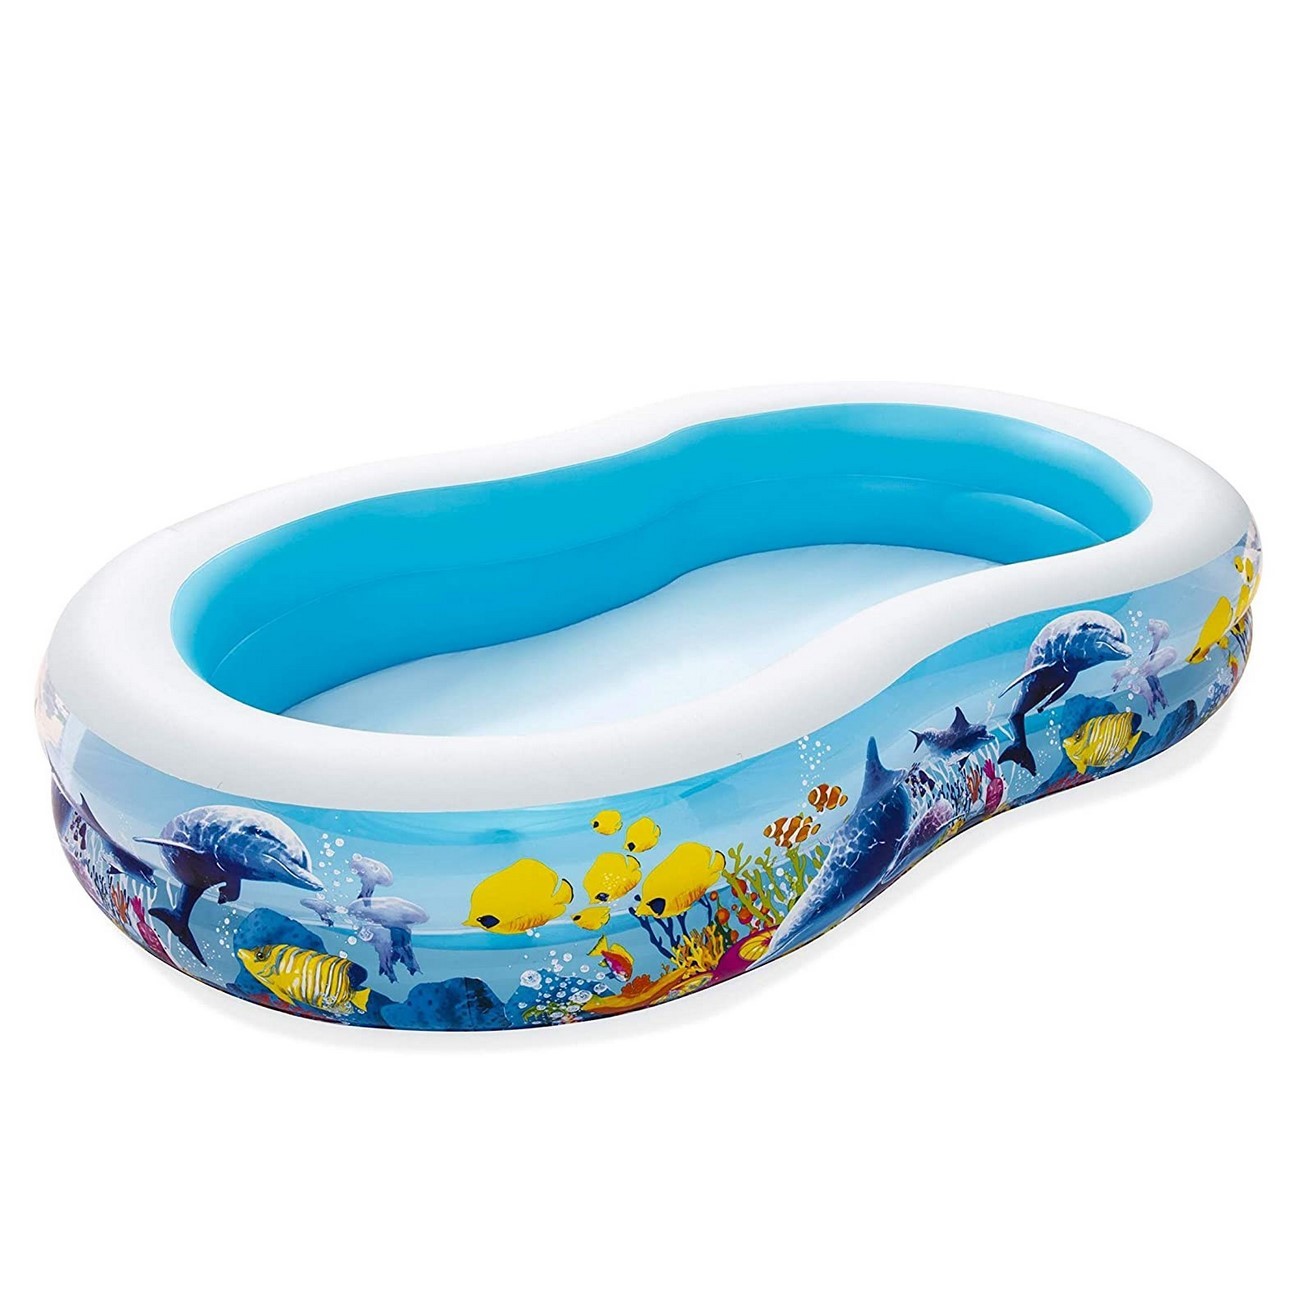 Piscina Inflable Ovalada Bestway 54118 544l Multicolor